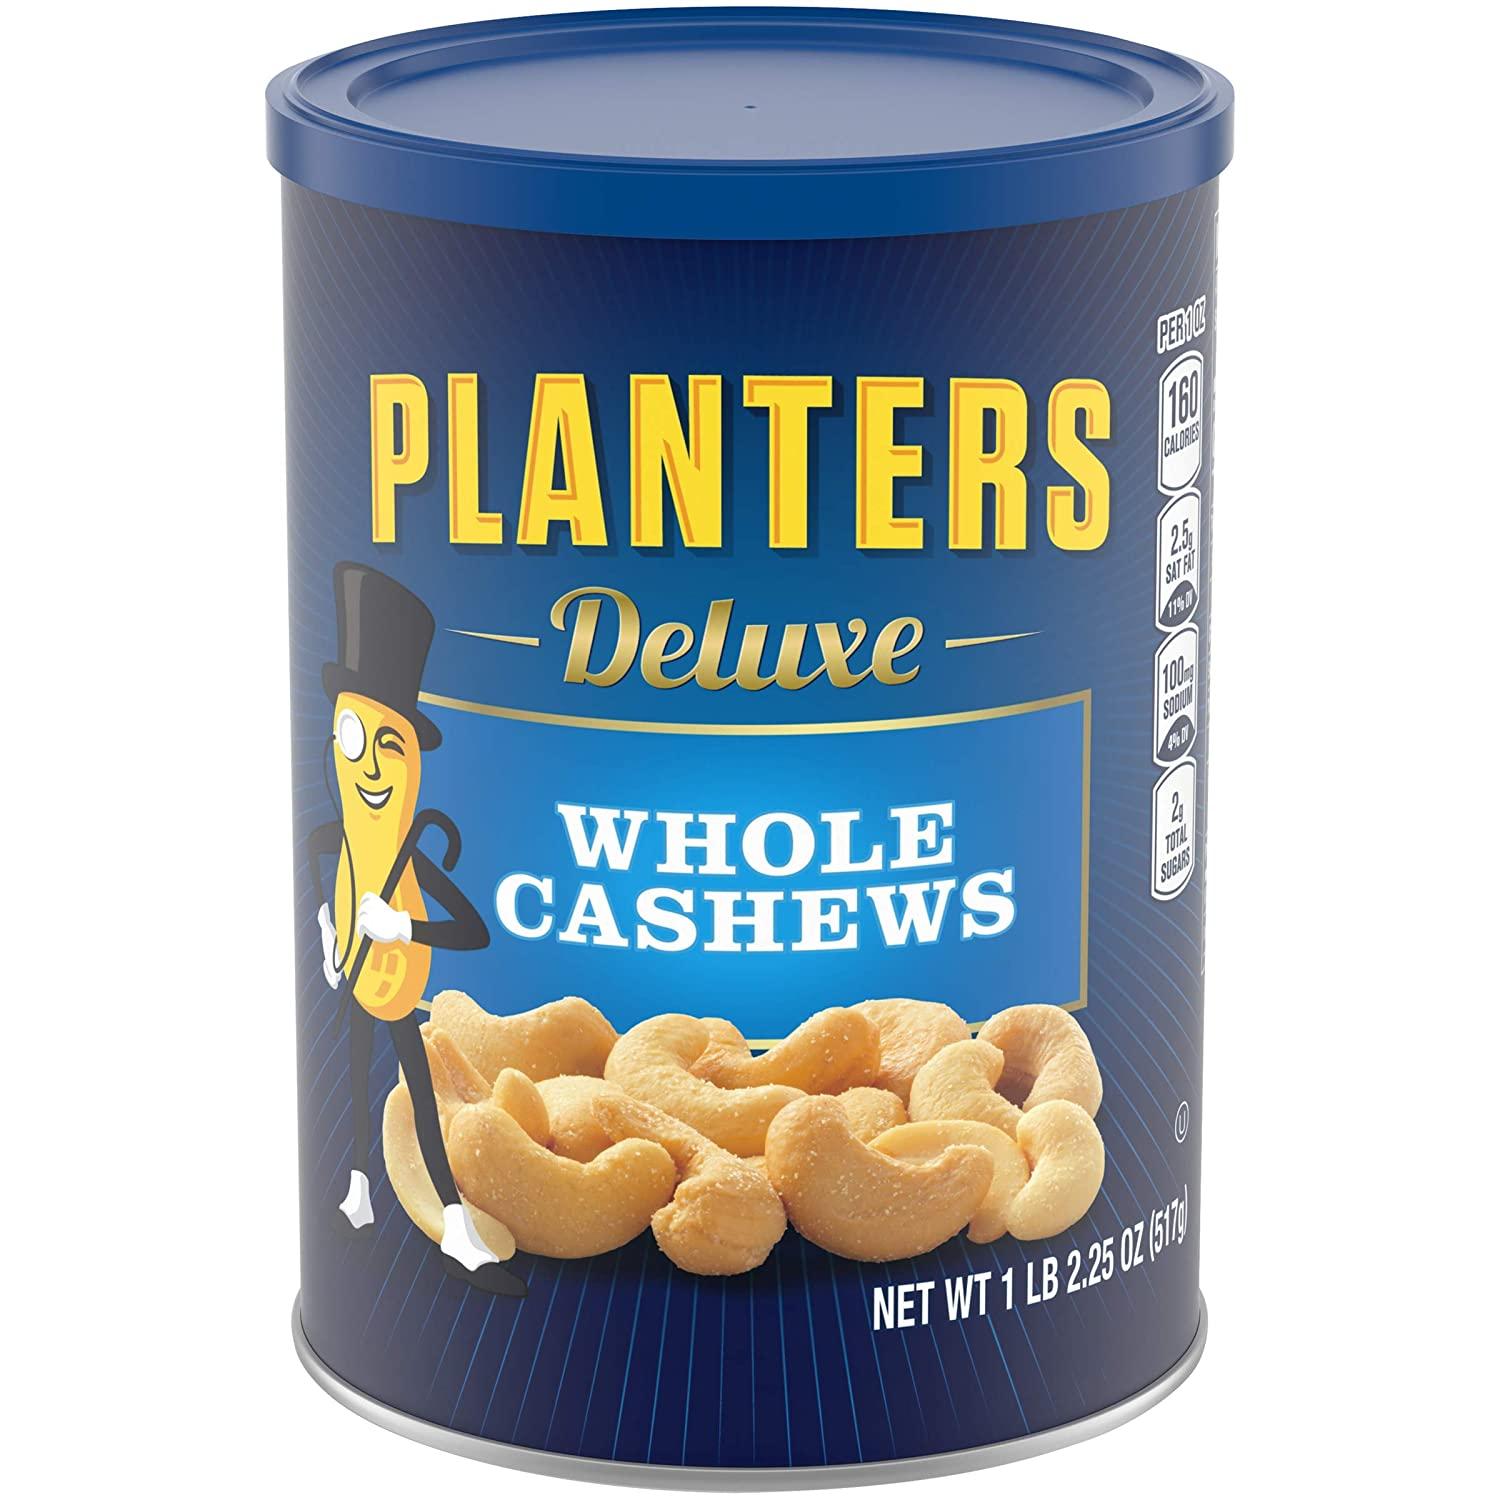 Planters Deluxe Whole Cashews Roasted in Peanut Oil for $7.63 Shipped